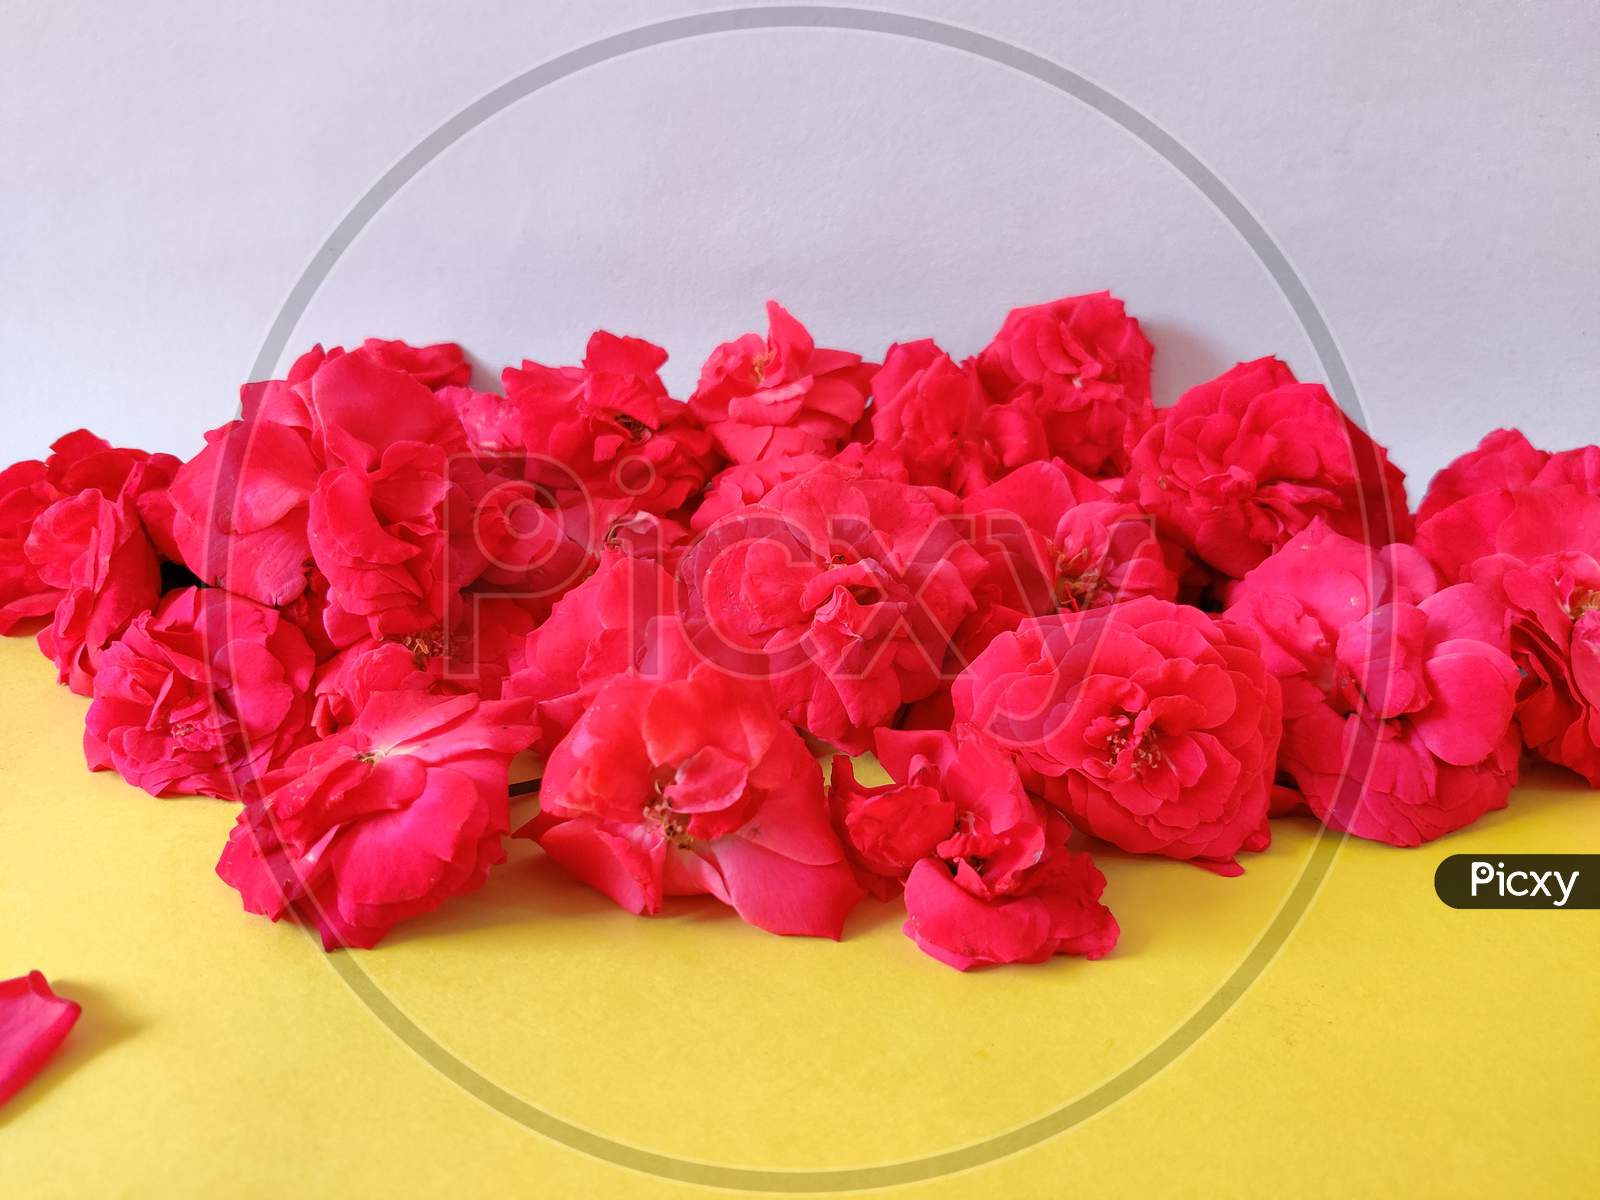 Beautiful Pink Roses Isloated On White And Yellow Background.Side View